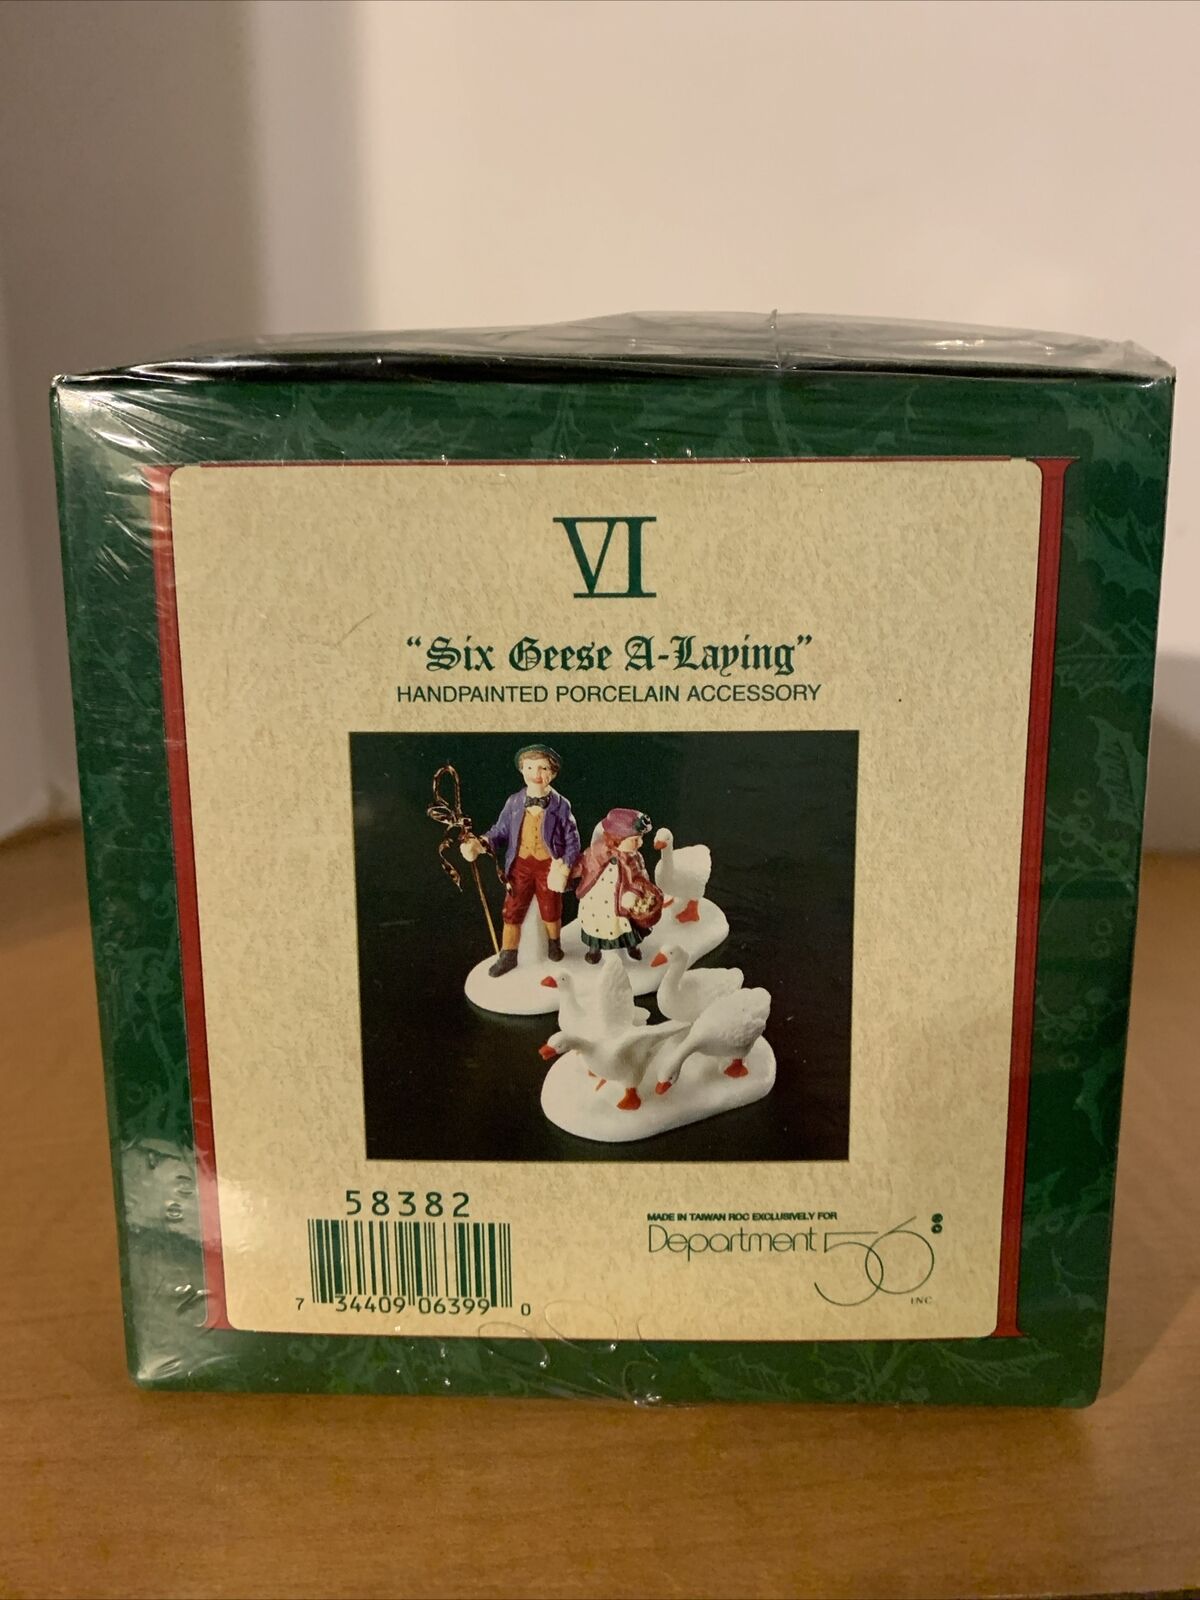 Dept. 56 Heritage 12 Days Of Christmas Dickens Village Six Geese A Laying VI Box